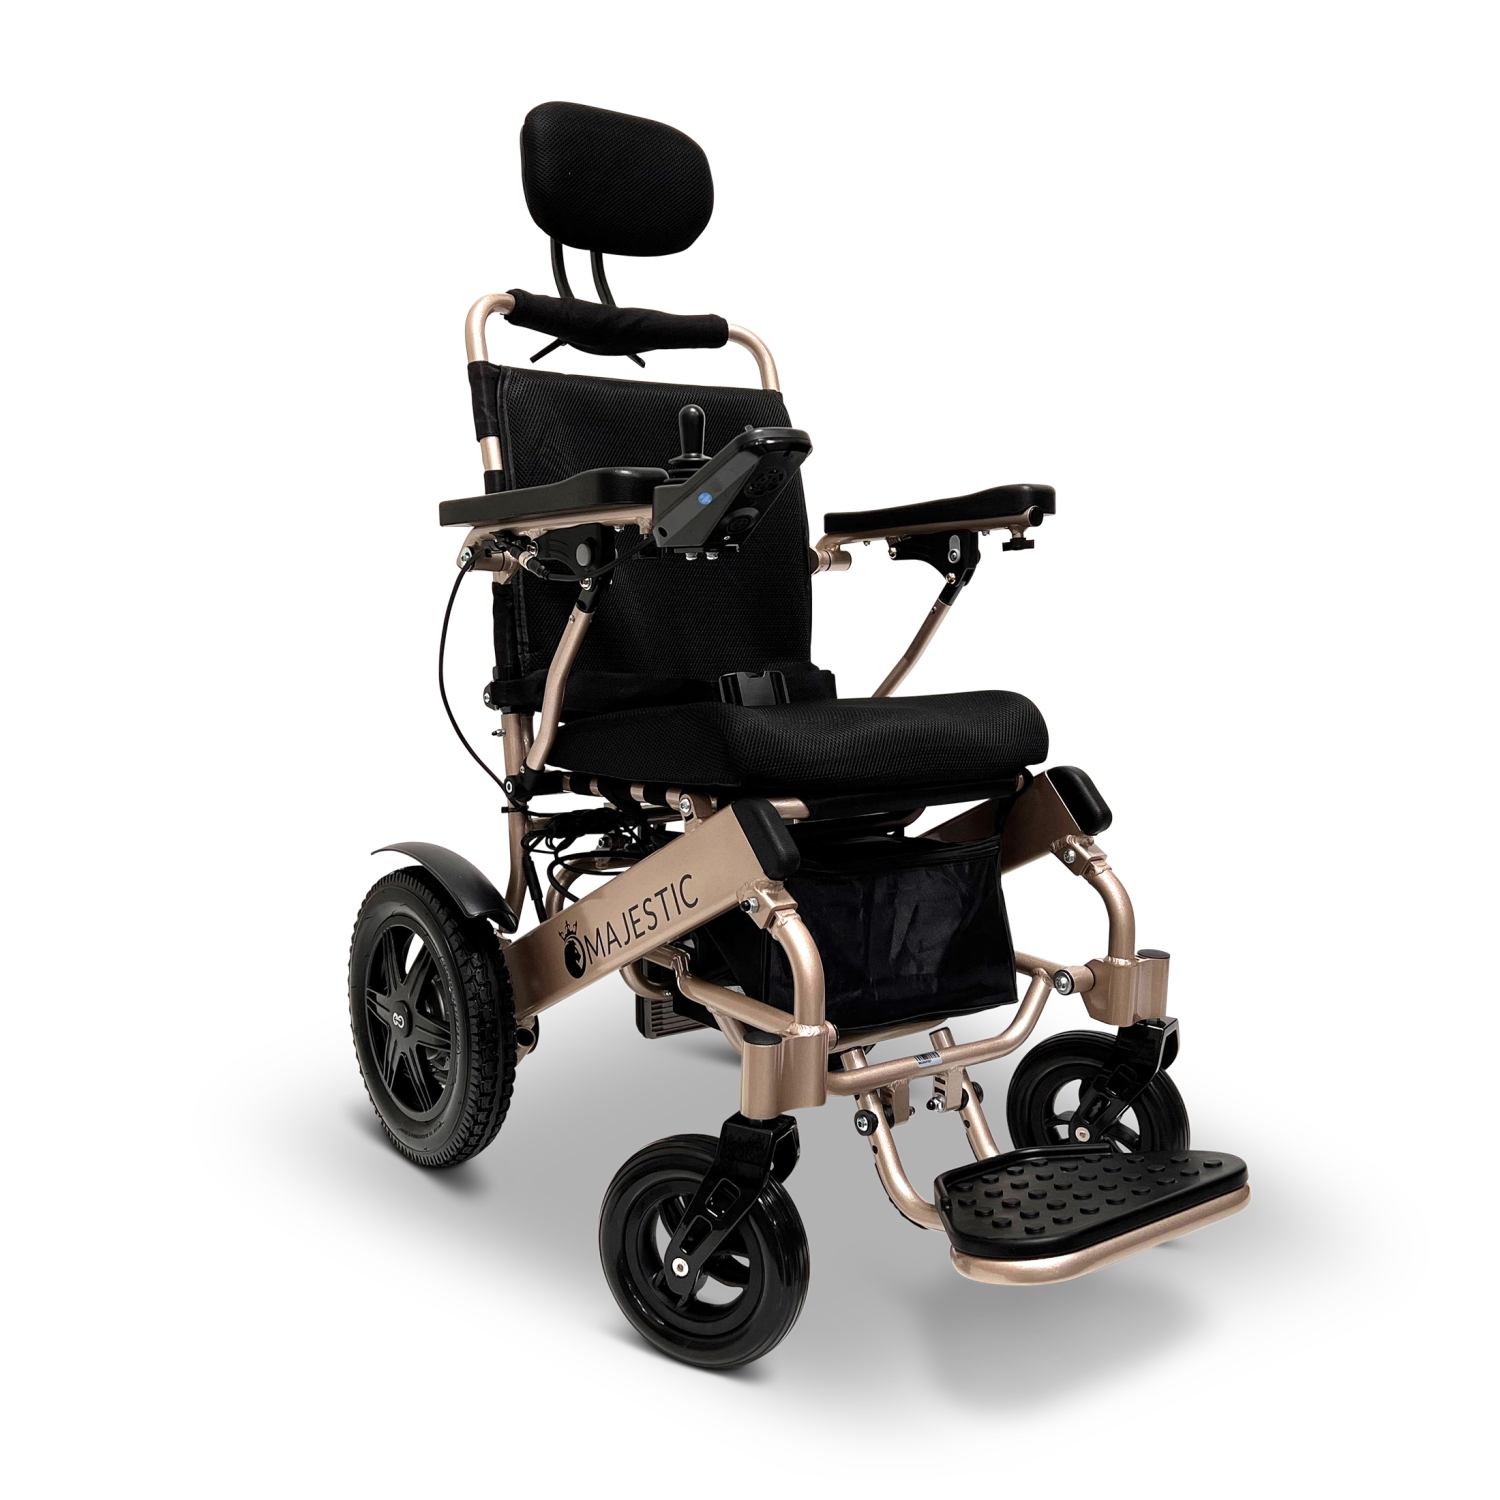 MAJESTIC IQ-9000 Airline Approved Luxury Electric Wheelchair | Auto Recline, LCD Joystick, Foldable, Up to 30 KM Range Ultra-Light | 17’’ Seat Width, Bronze Frame, Standard Textile